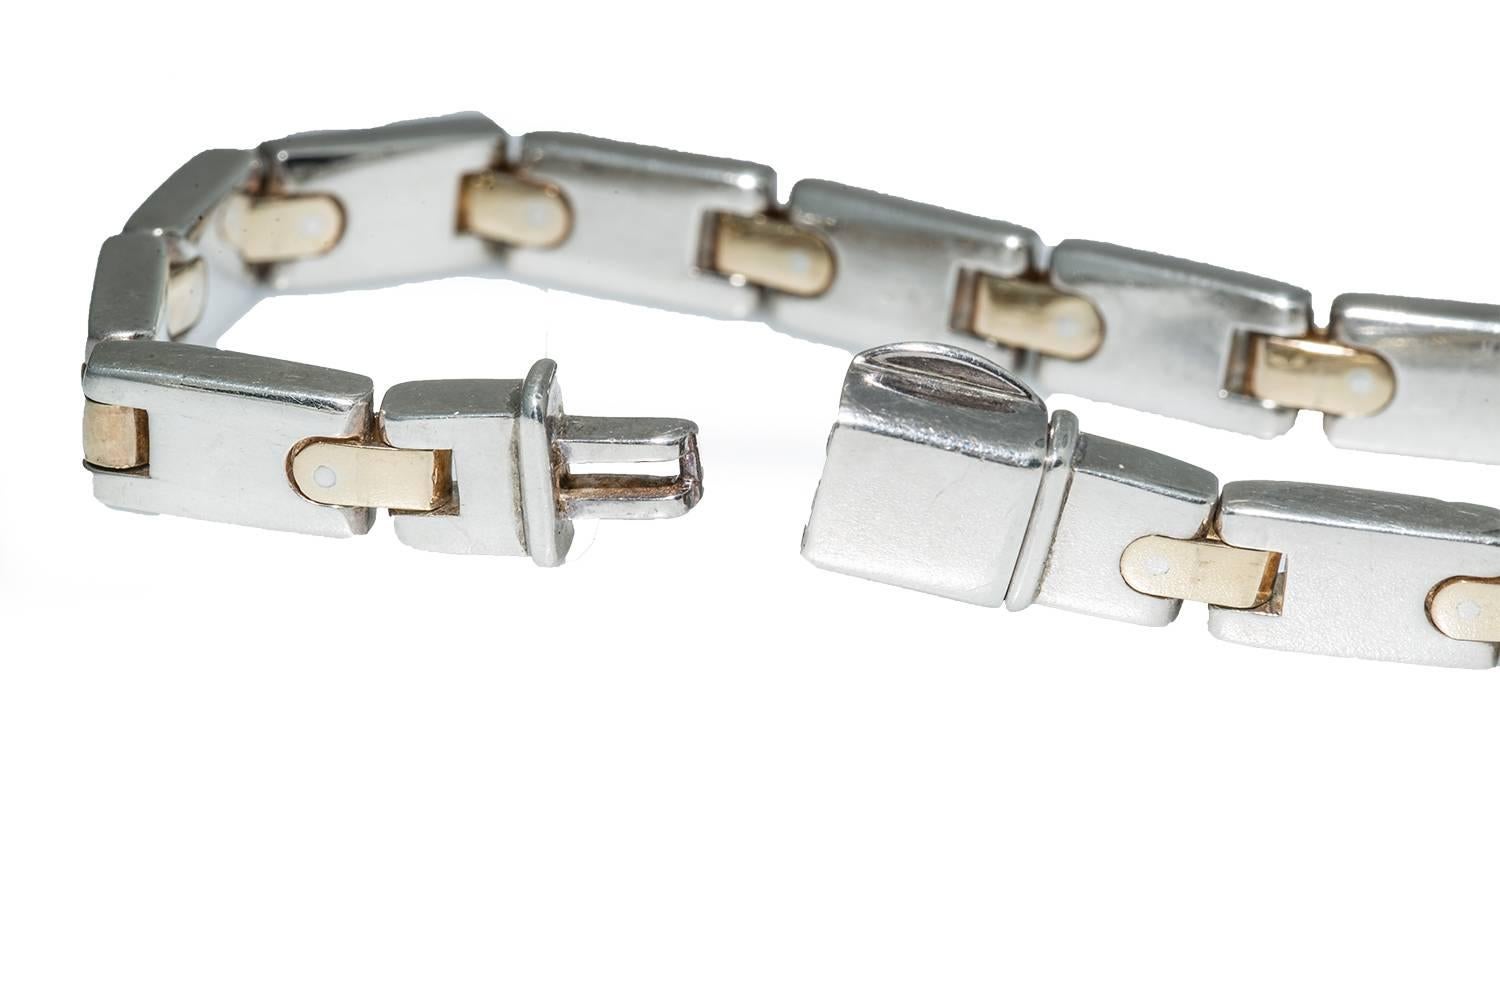 This Tiffany bracelet was made in Italy. It is clearly stamped with the Tiffany marks and 925/750 for silver and 18k gold. The construction is tailored and classic. This piece weighs 42.8 grams and is 7.5 inches long. It is in excellent condition.